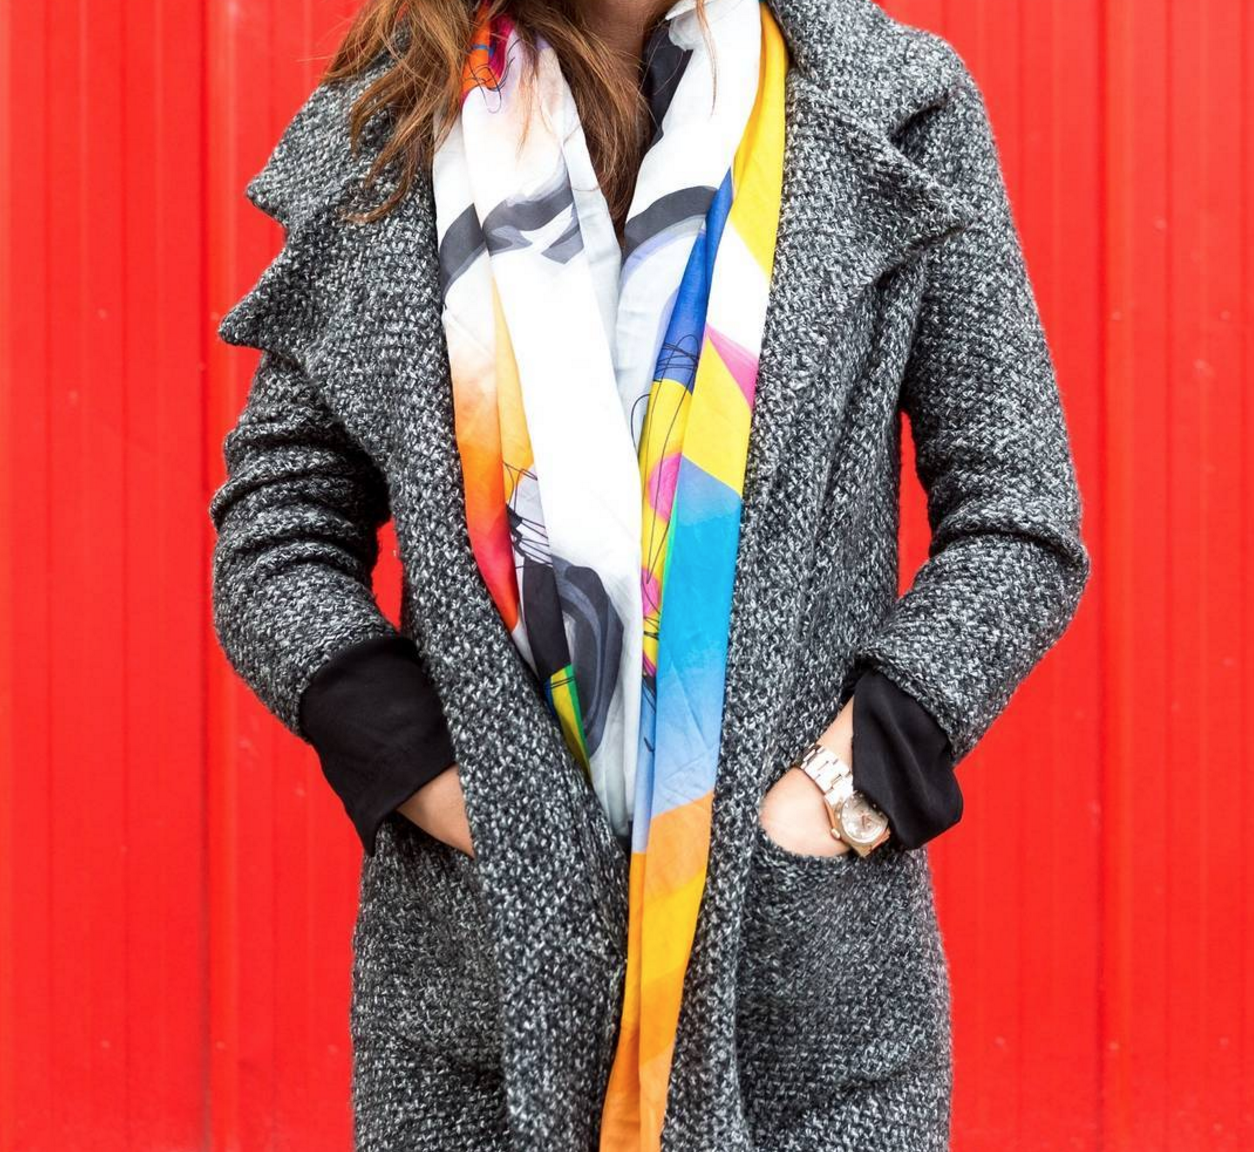 Tuesday Inspo - Surface Patterned Scarves!